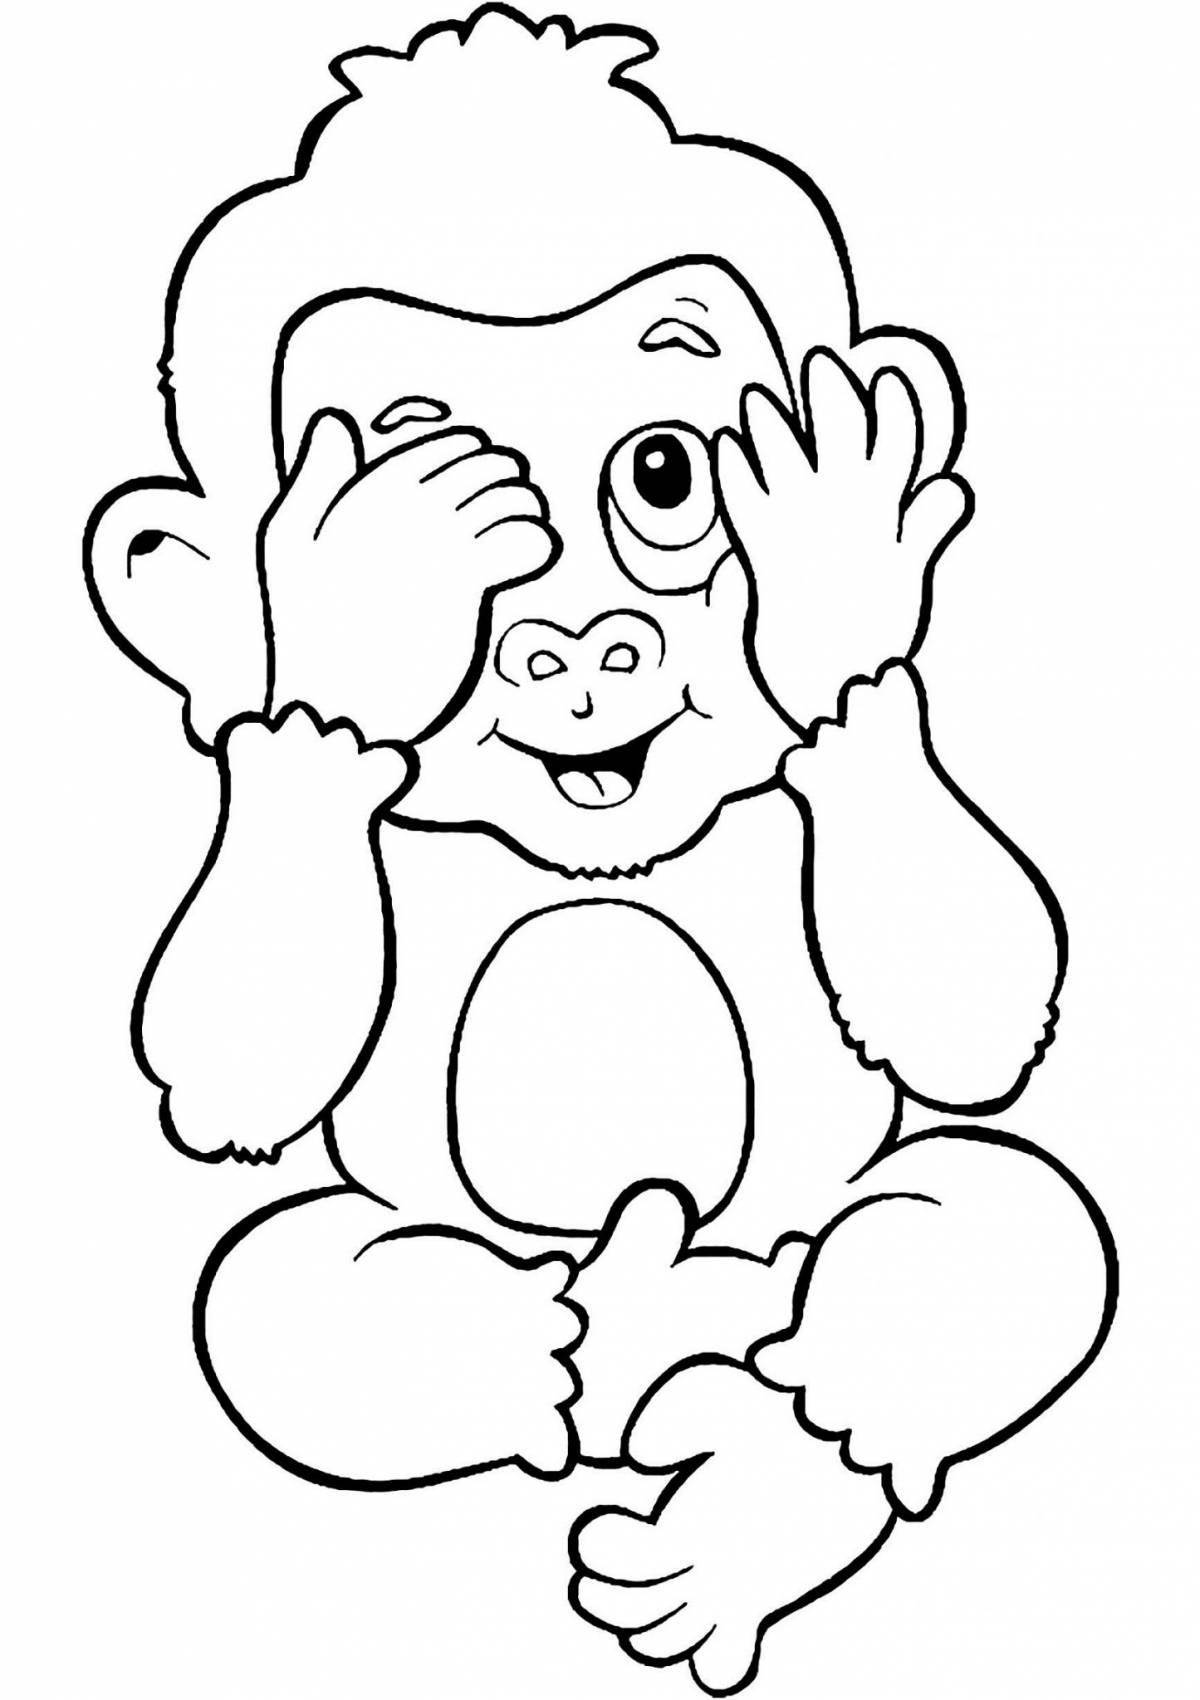 Expressive monkey coloring book for kids